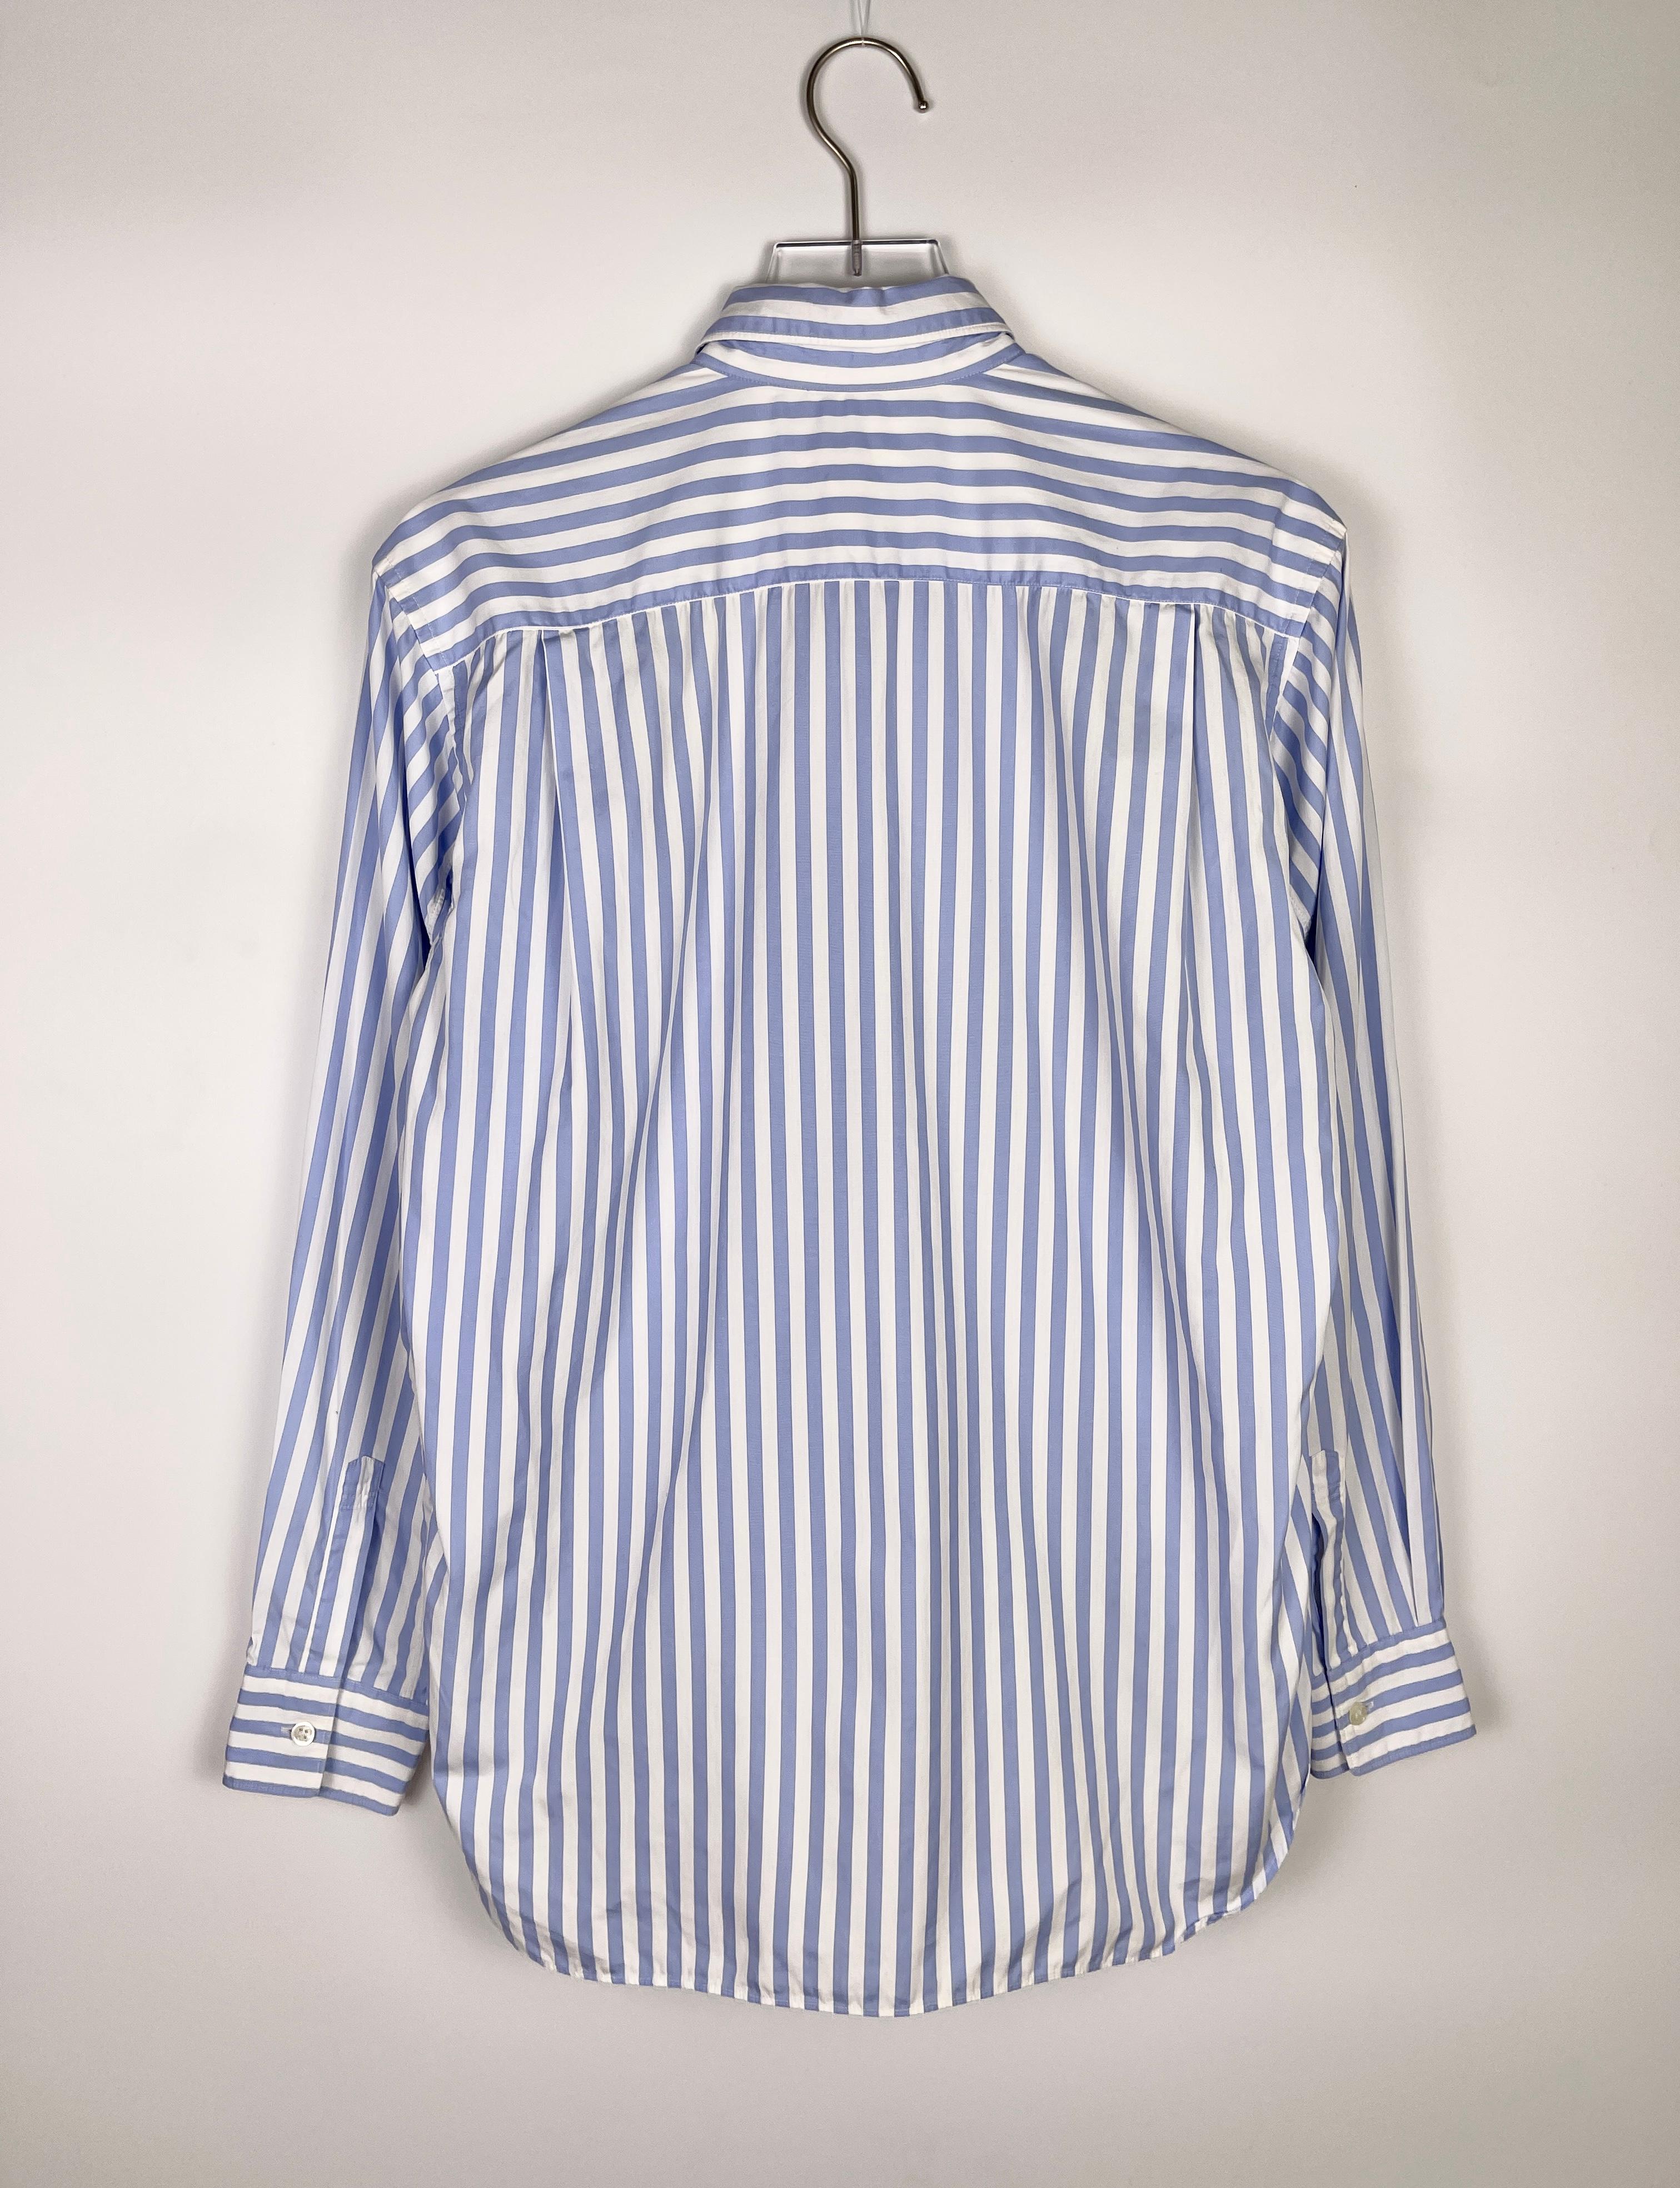 Comme des Garcons SHIRT Old Man Buttoned-Up Shirt In Good Condition For Sale In Seattle, WA